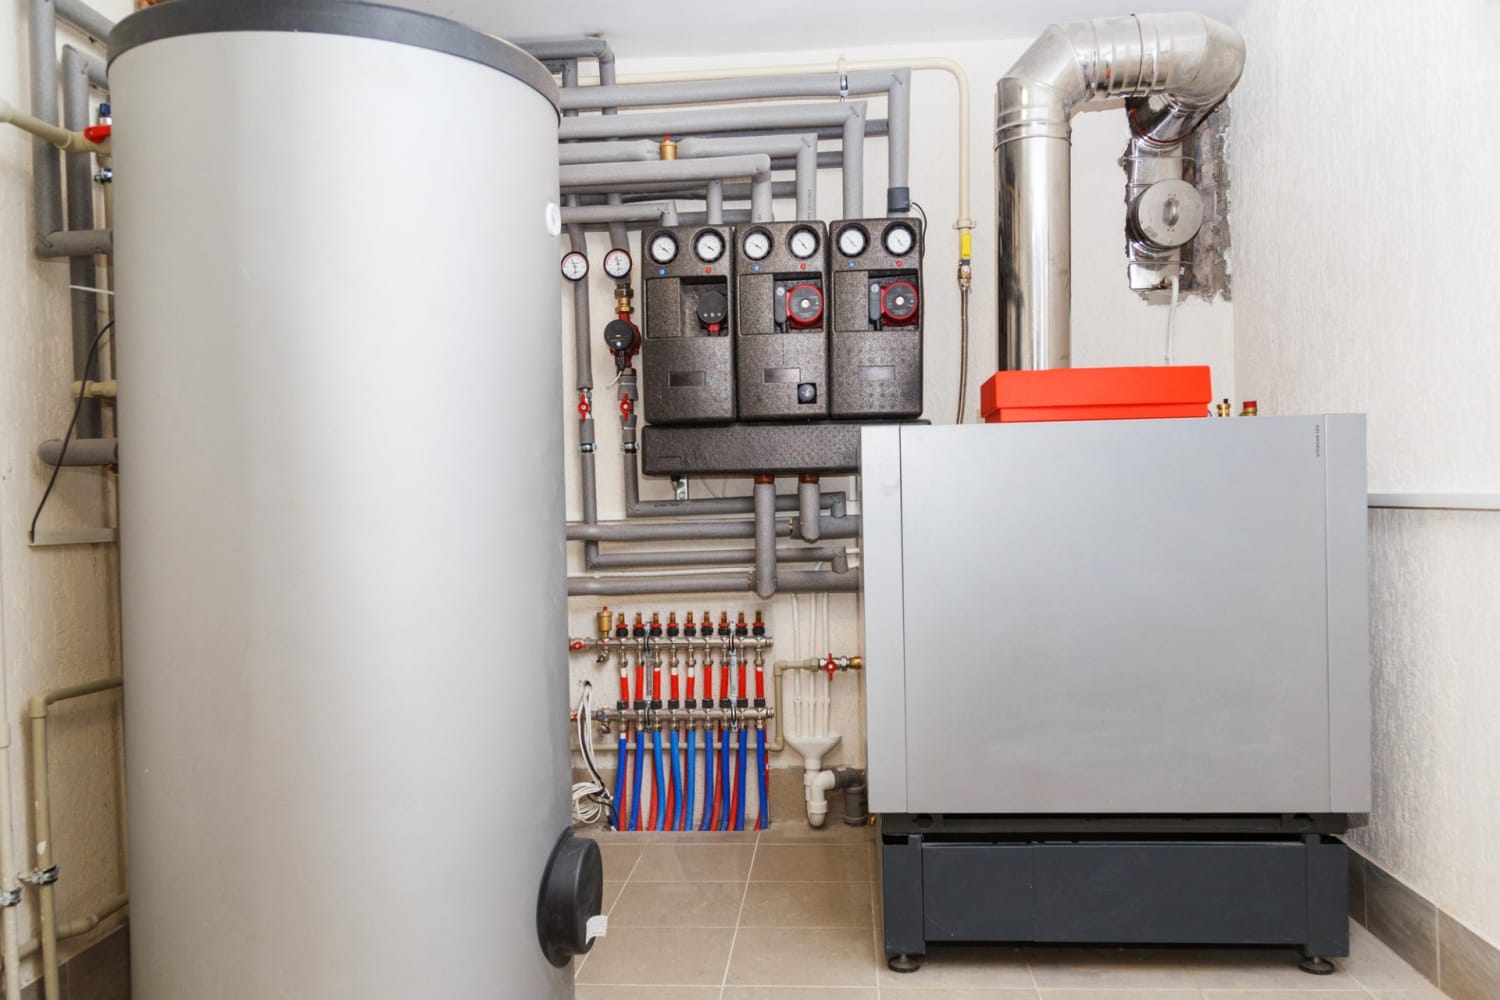 Boiler vs. Furnace: What's The Difference And Which Is Right For You?